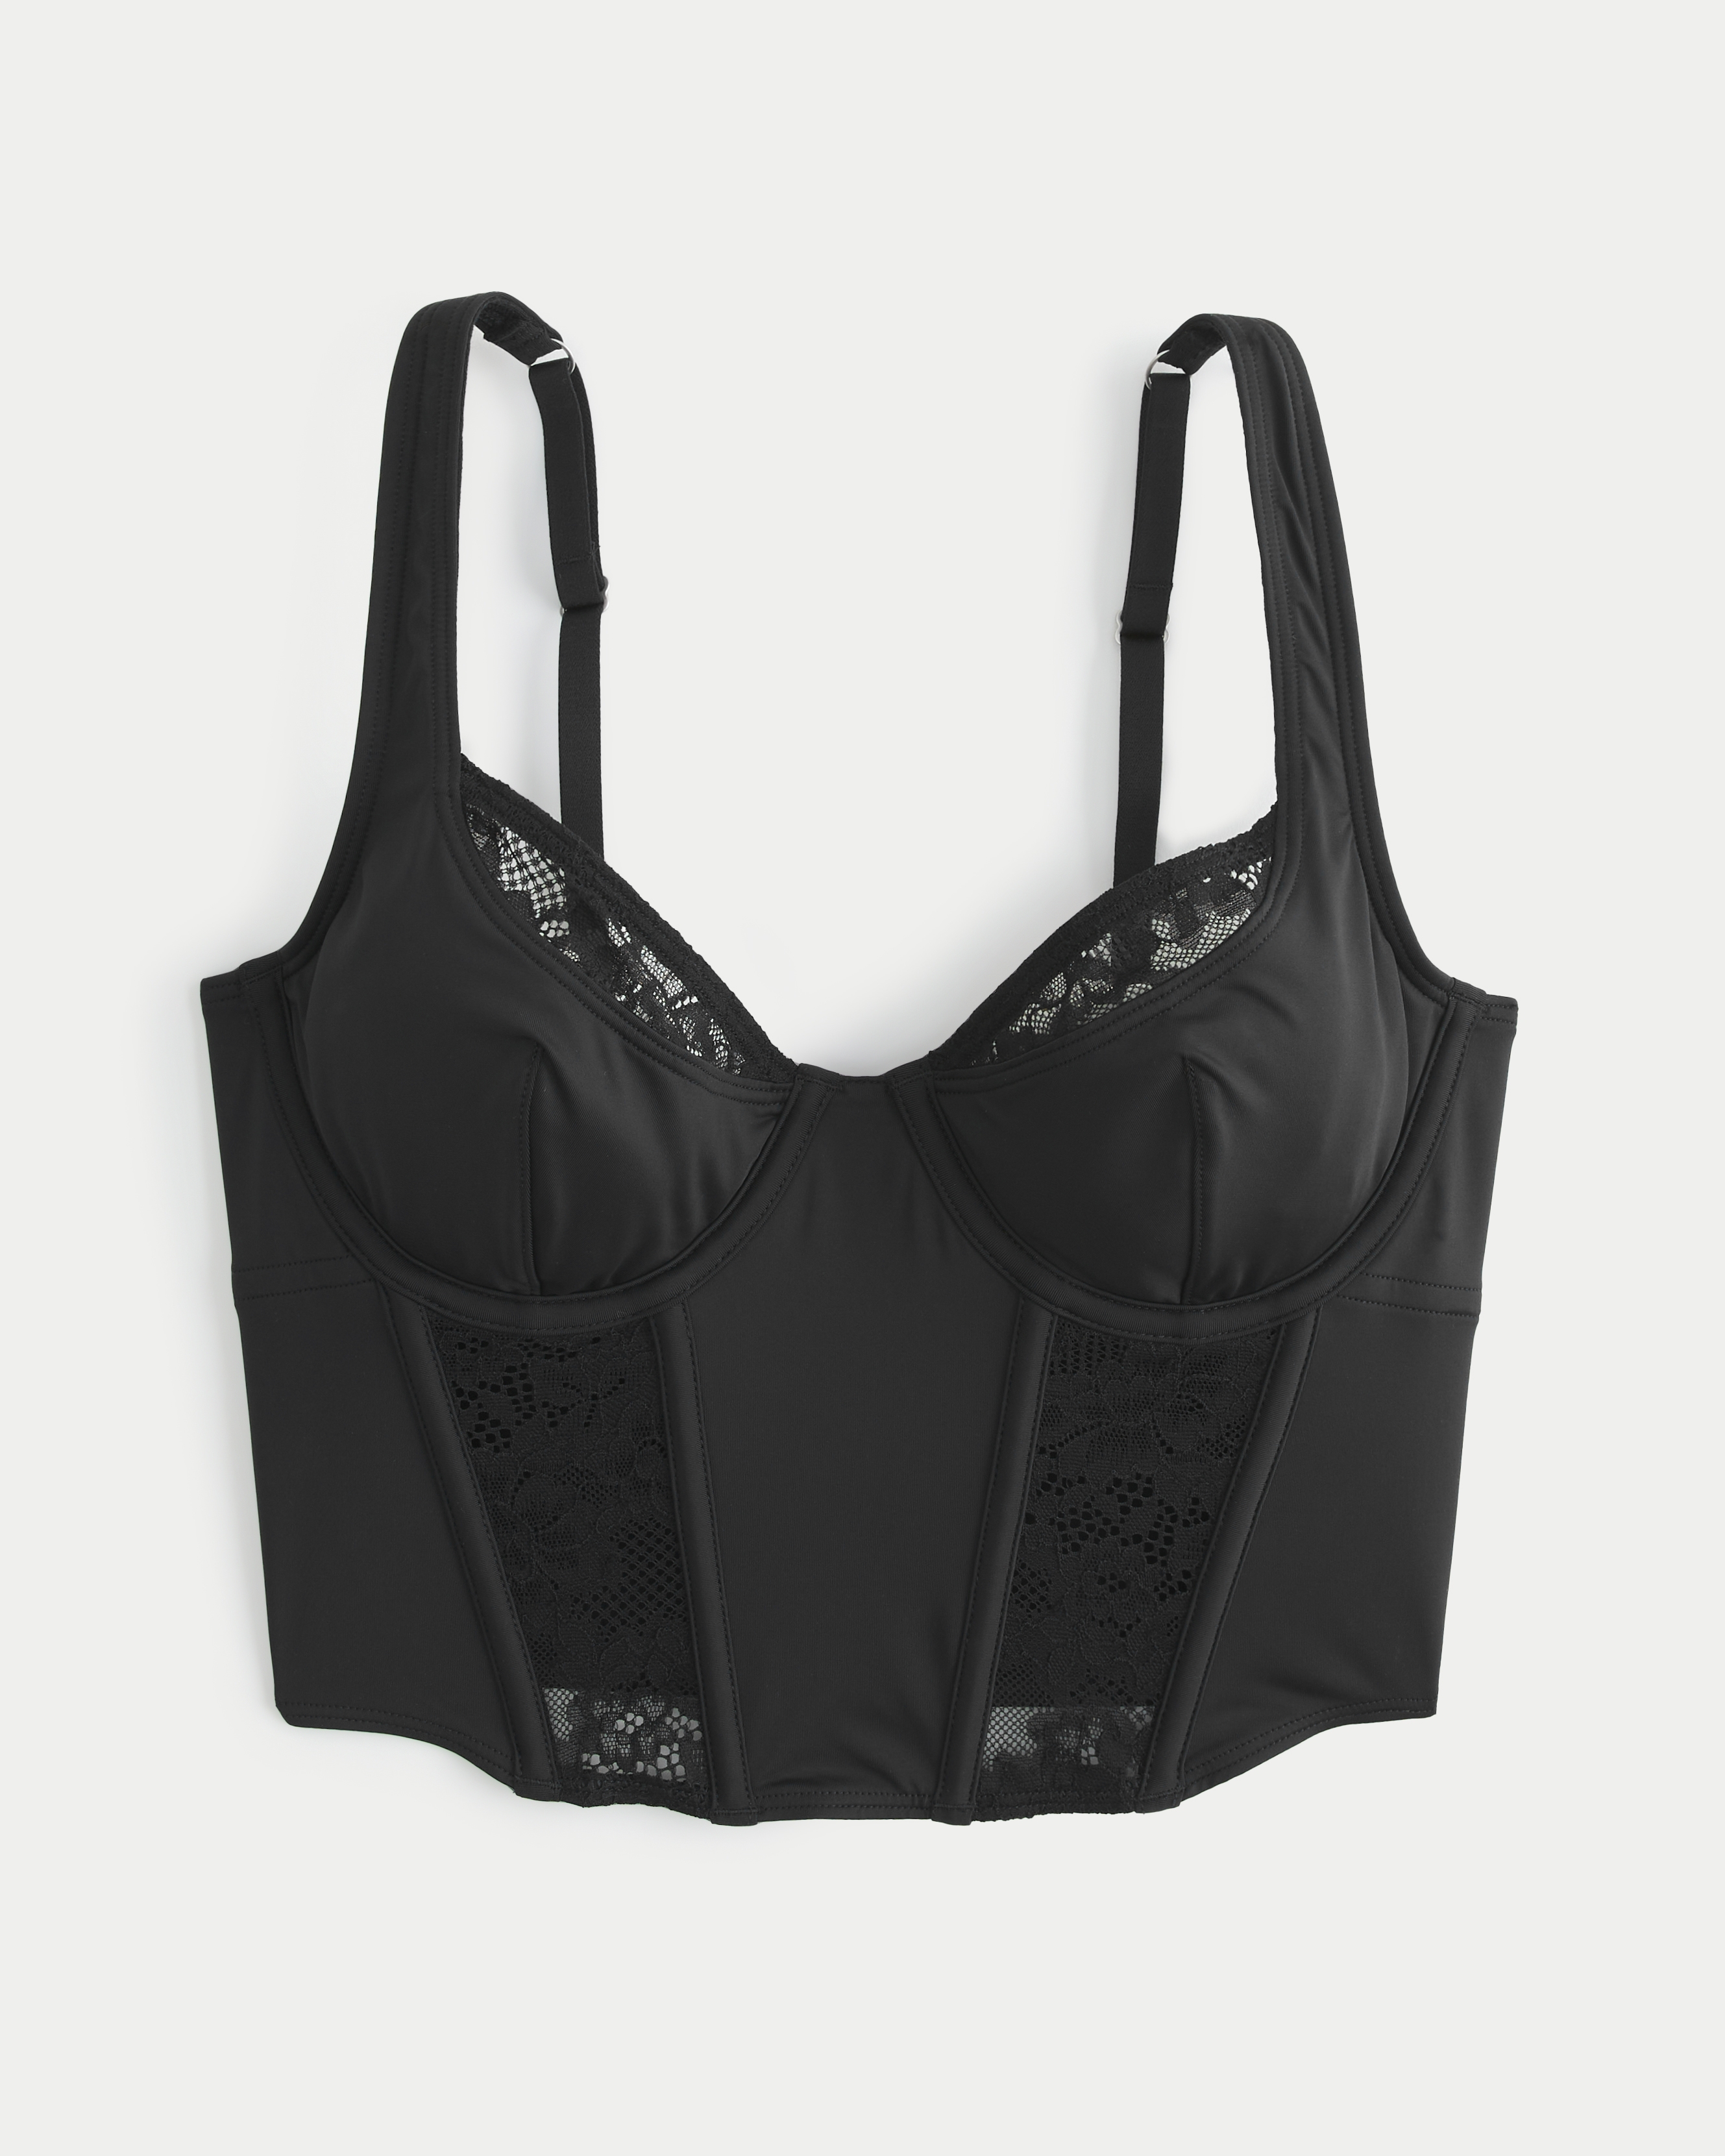 Hollister Gilly Hicks Micro-Modal + Lace Bustier